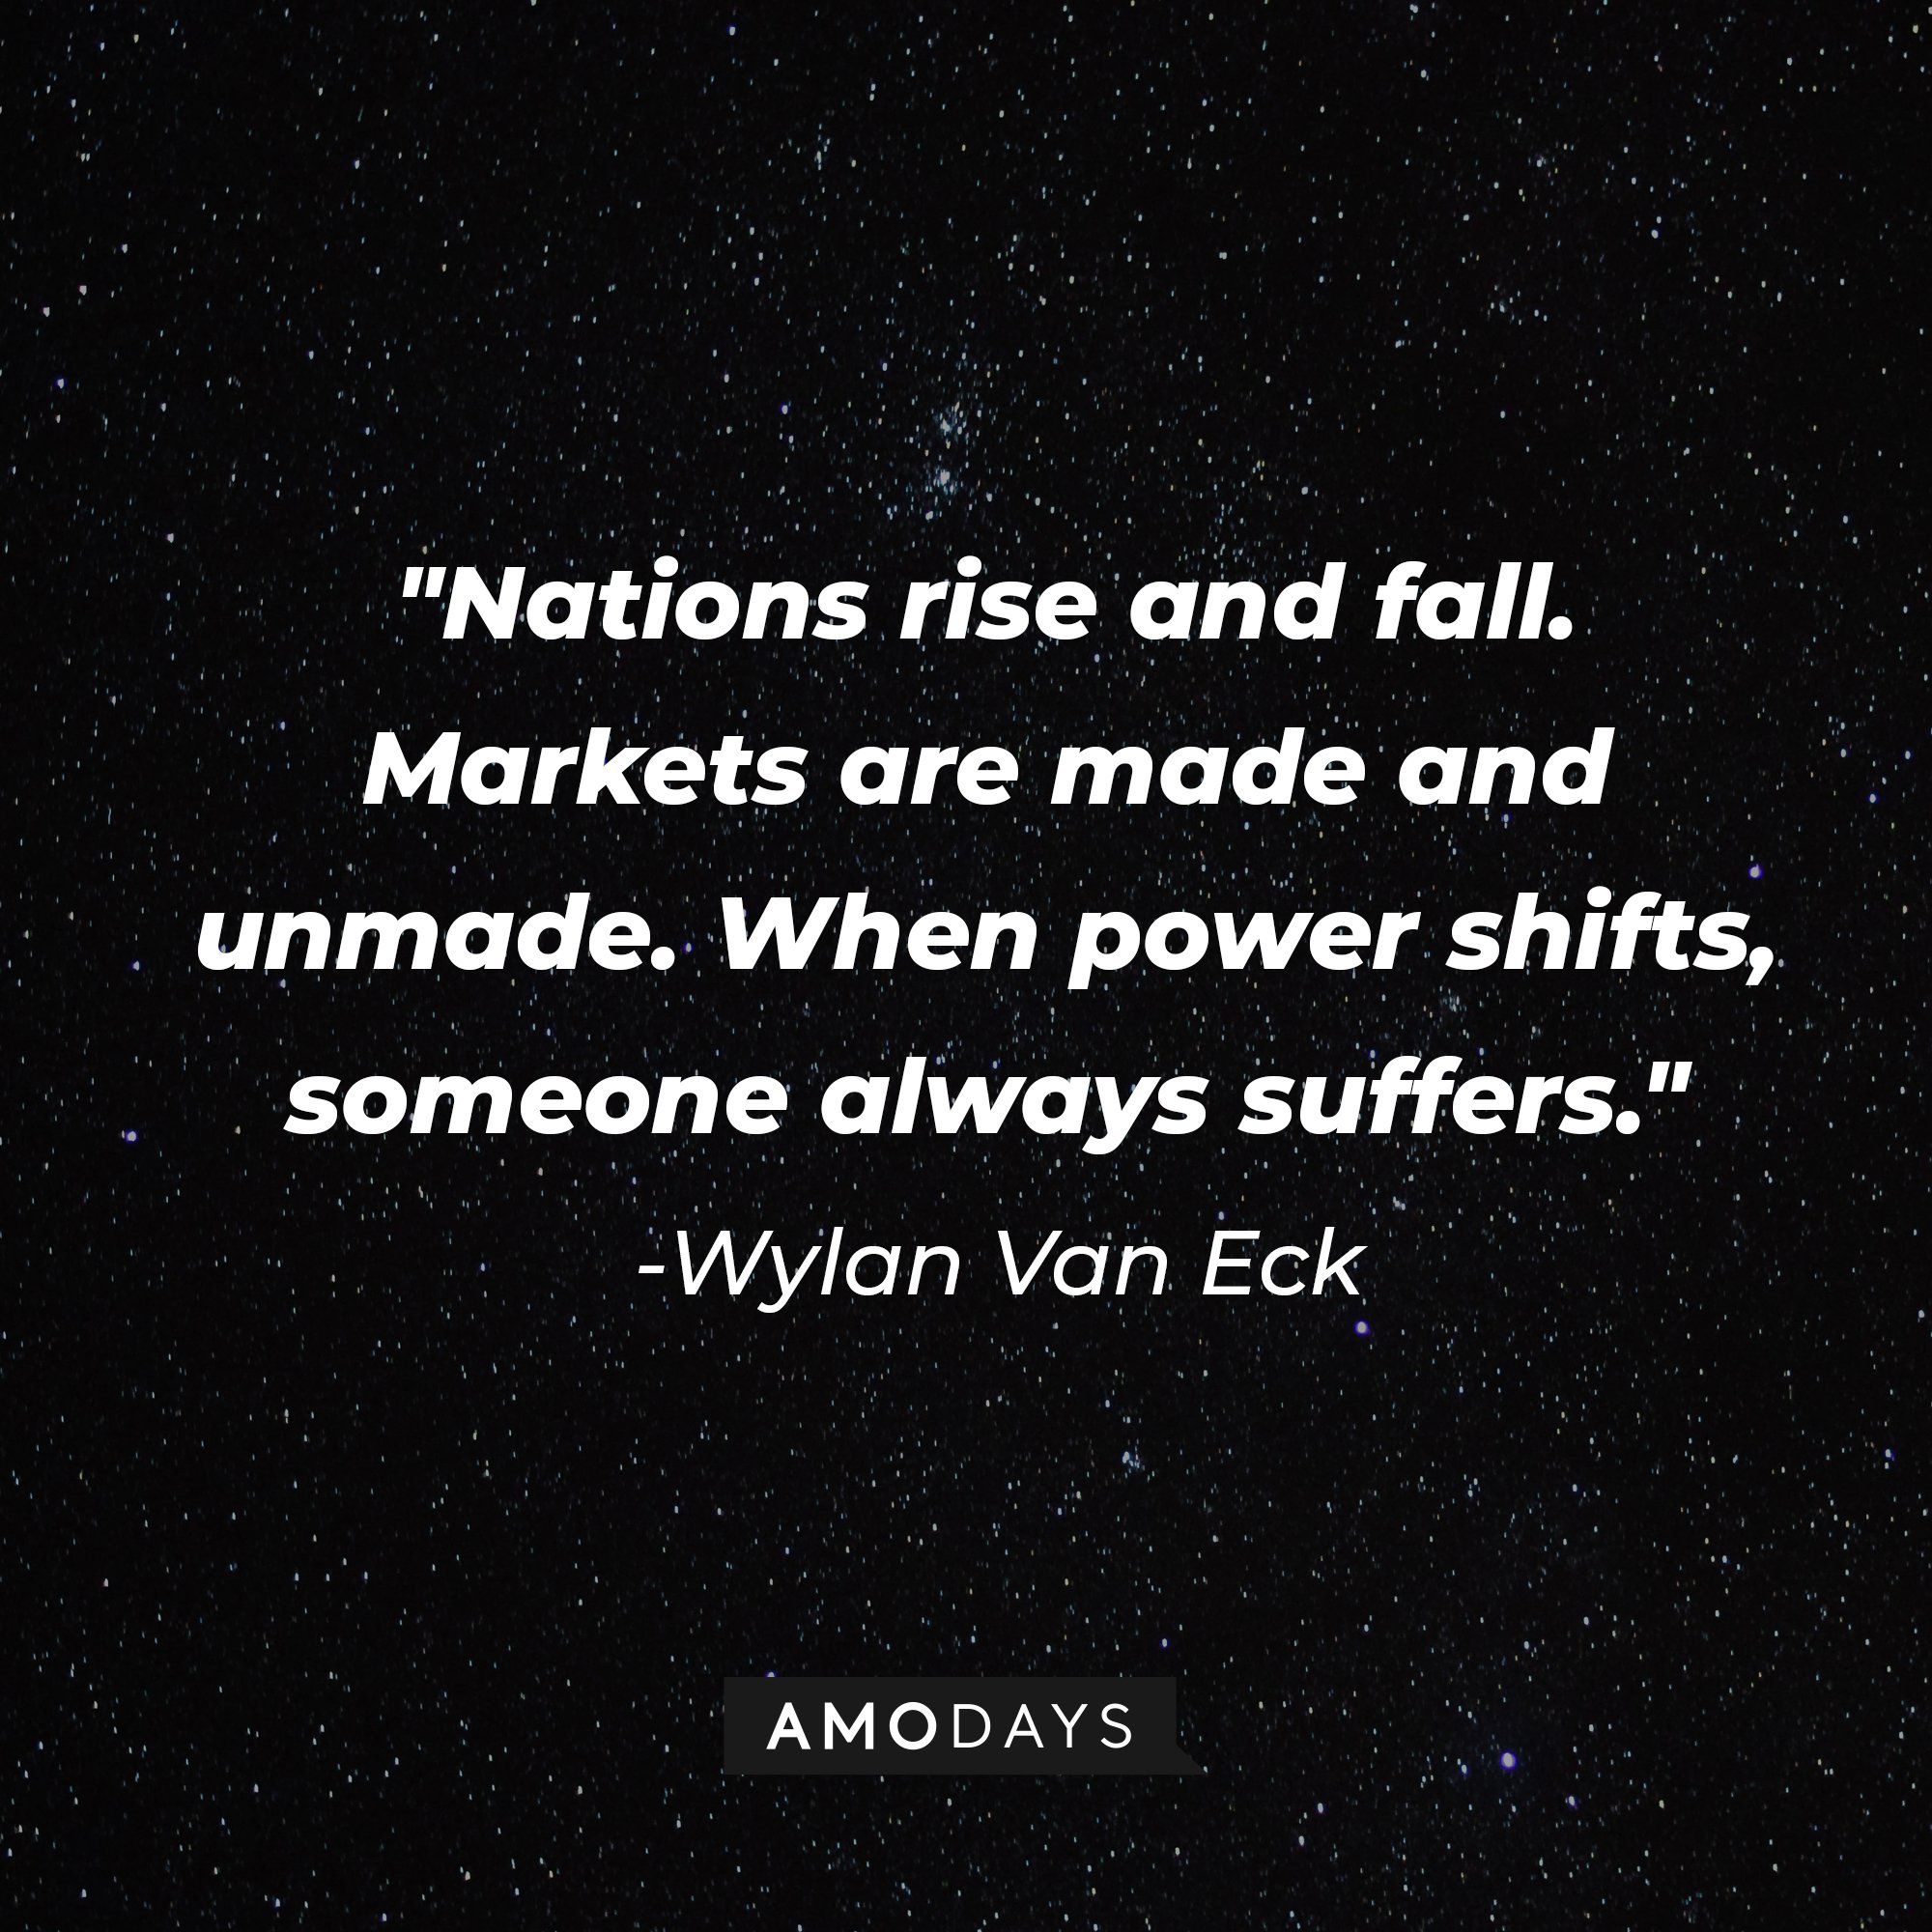  Wylan Van Eck’s quote: "Nations rise and fall. Markets are made and unmade. When power shifts, someone always suffers." | Image: AmoDays